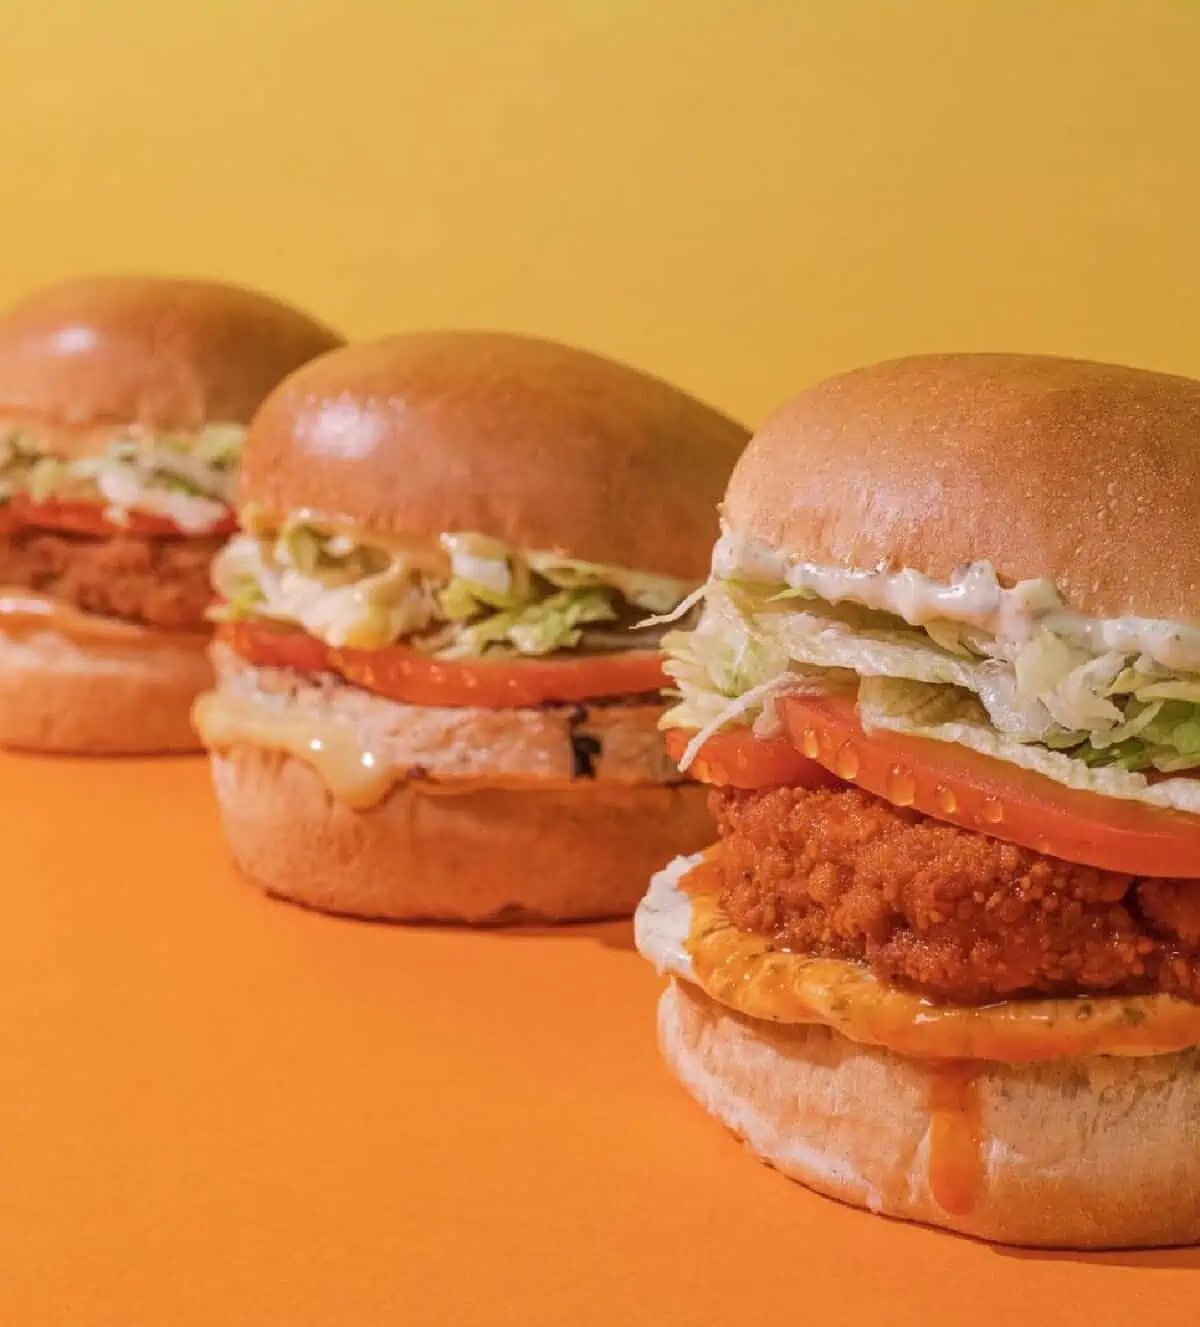 Three Plant Power Fast Food 'Chicken' Sandwiches in a diagonal row on an orange countertop with a background of yellow walls.